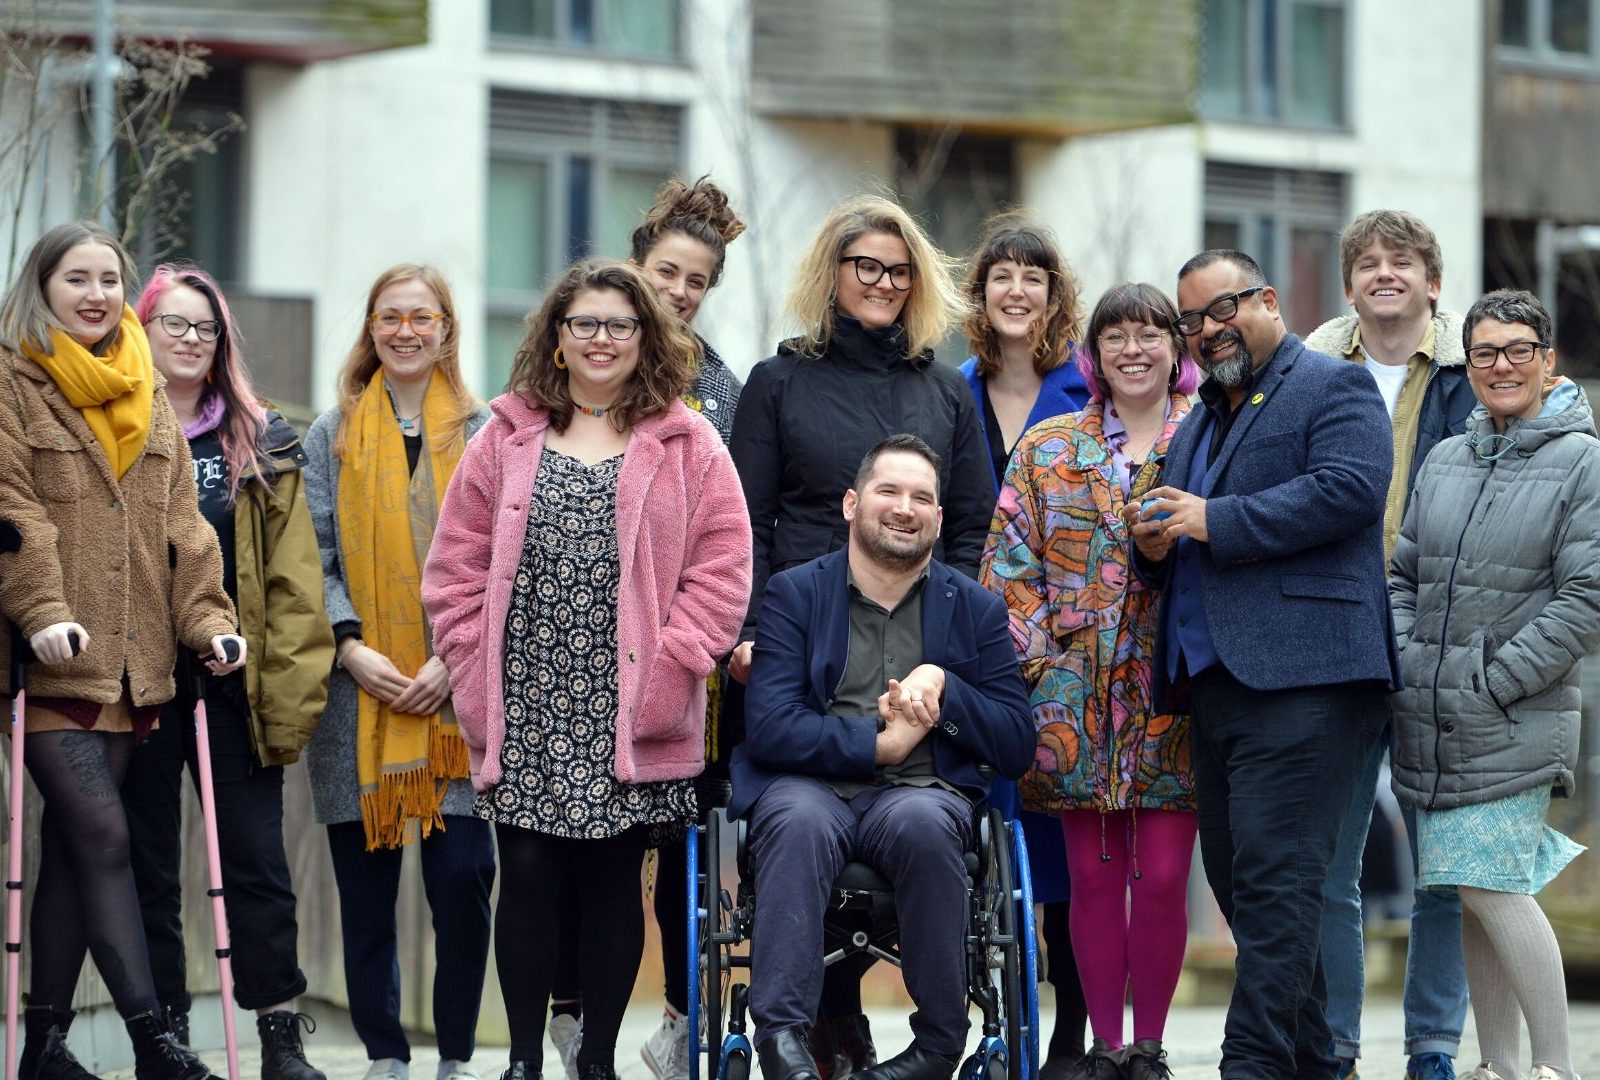 The D&A team outside their office in Brighton. They are moving towards the camera, but are looking at each other, chatting and smiling as they go. They are a diverse mix of ages, races, disabilities and genders.